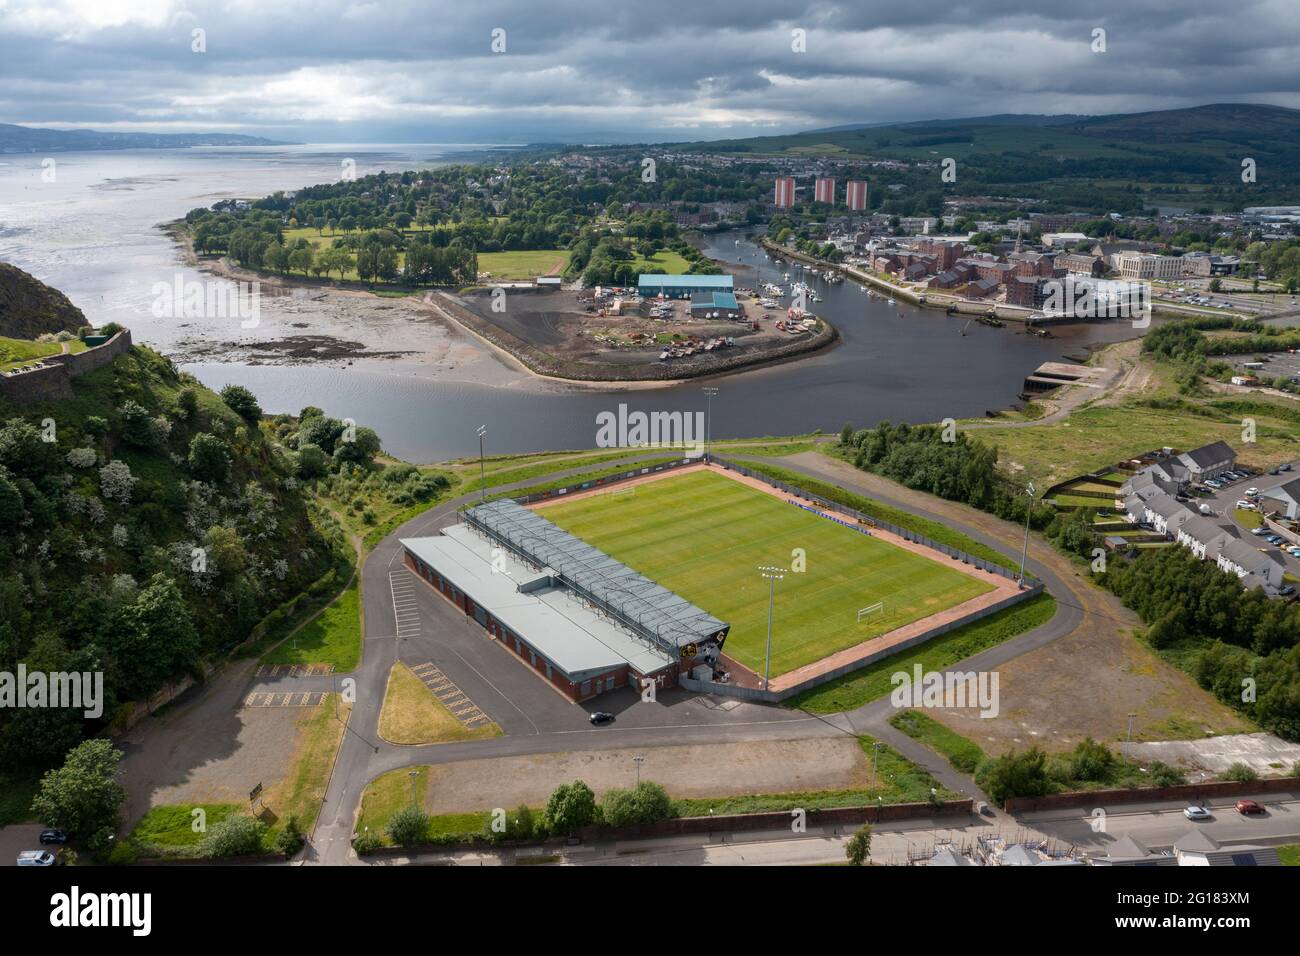 Aerial view of the C&G Systems Stadium, home of Dumbarton Football club with Dumbarton Rock overlooking the stadium. Stock Photo